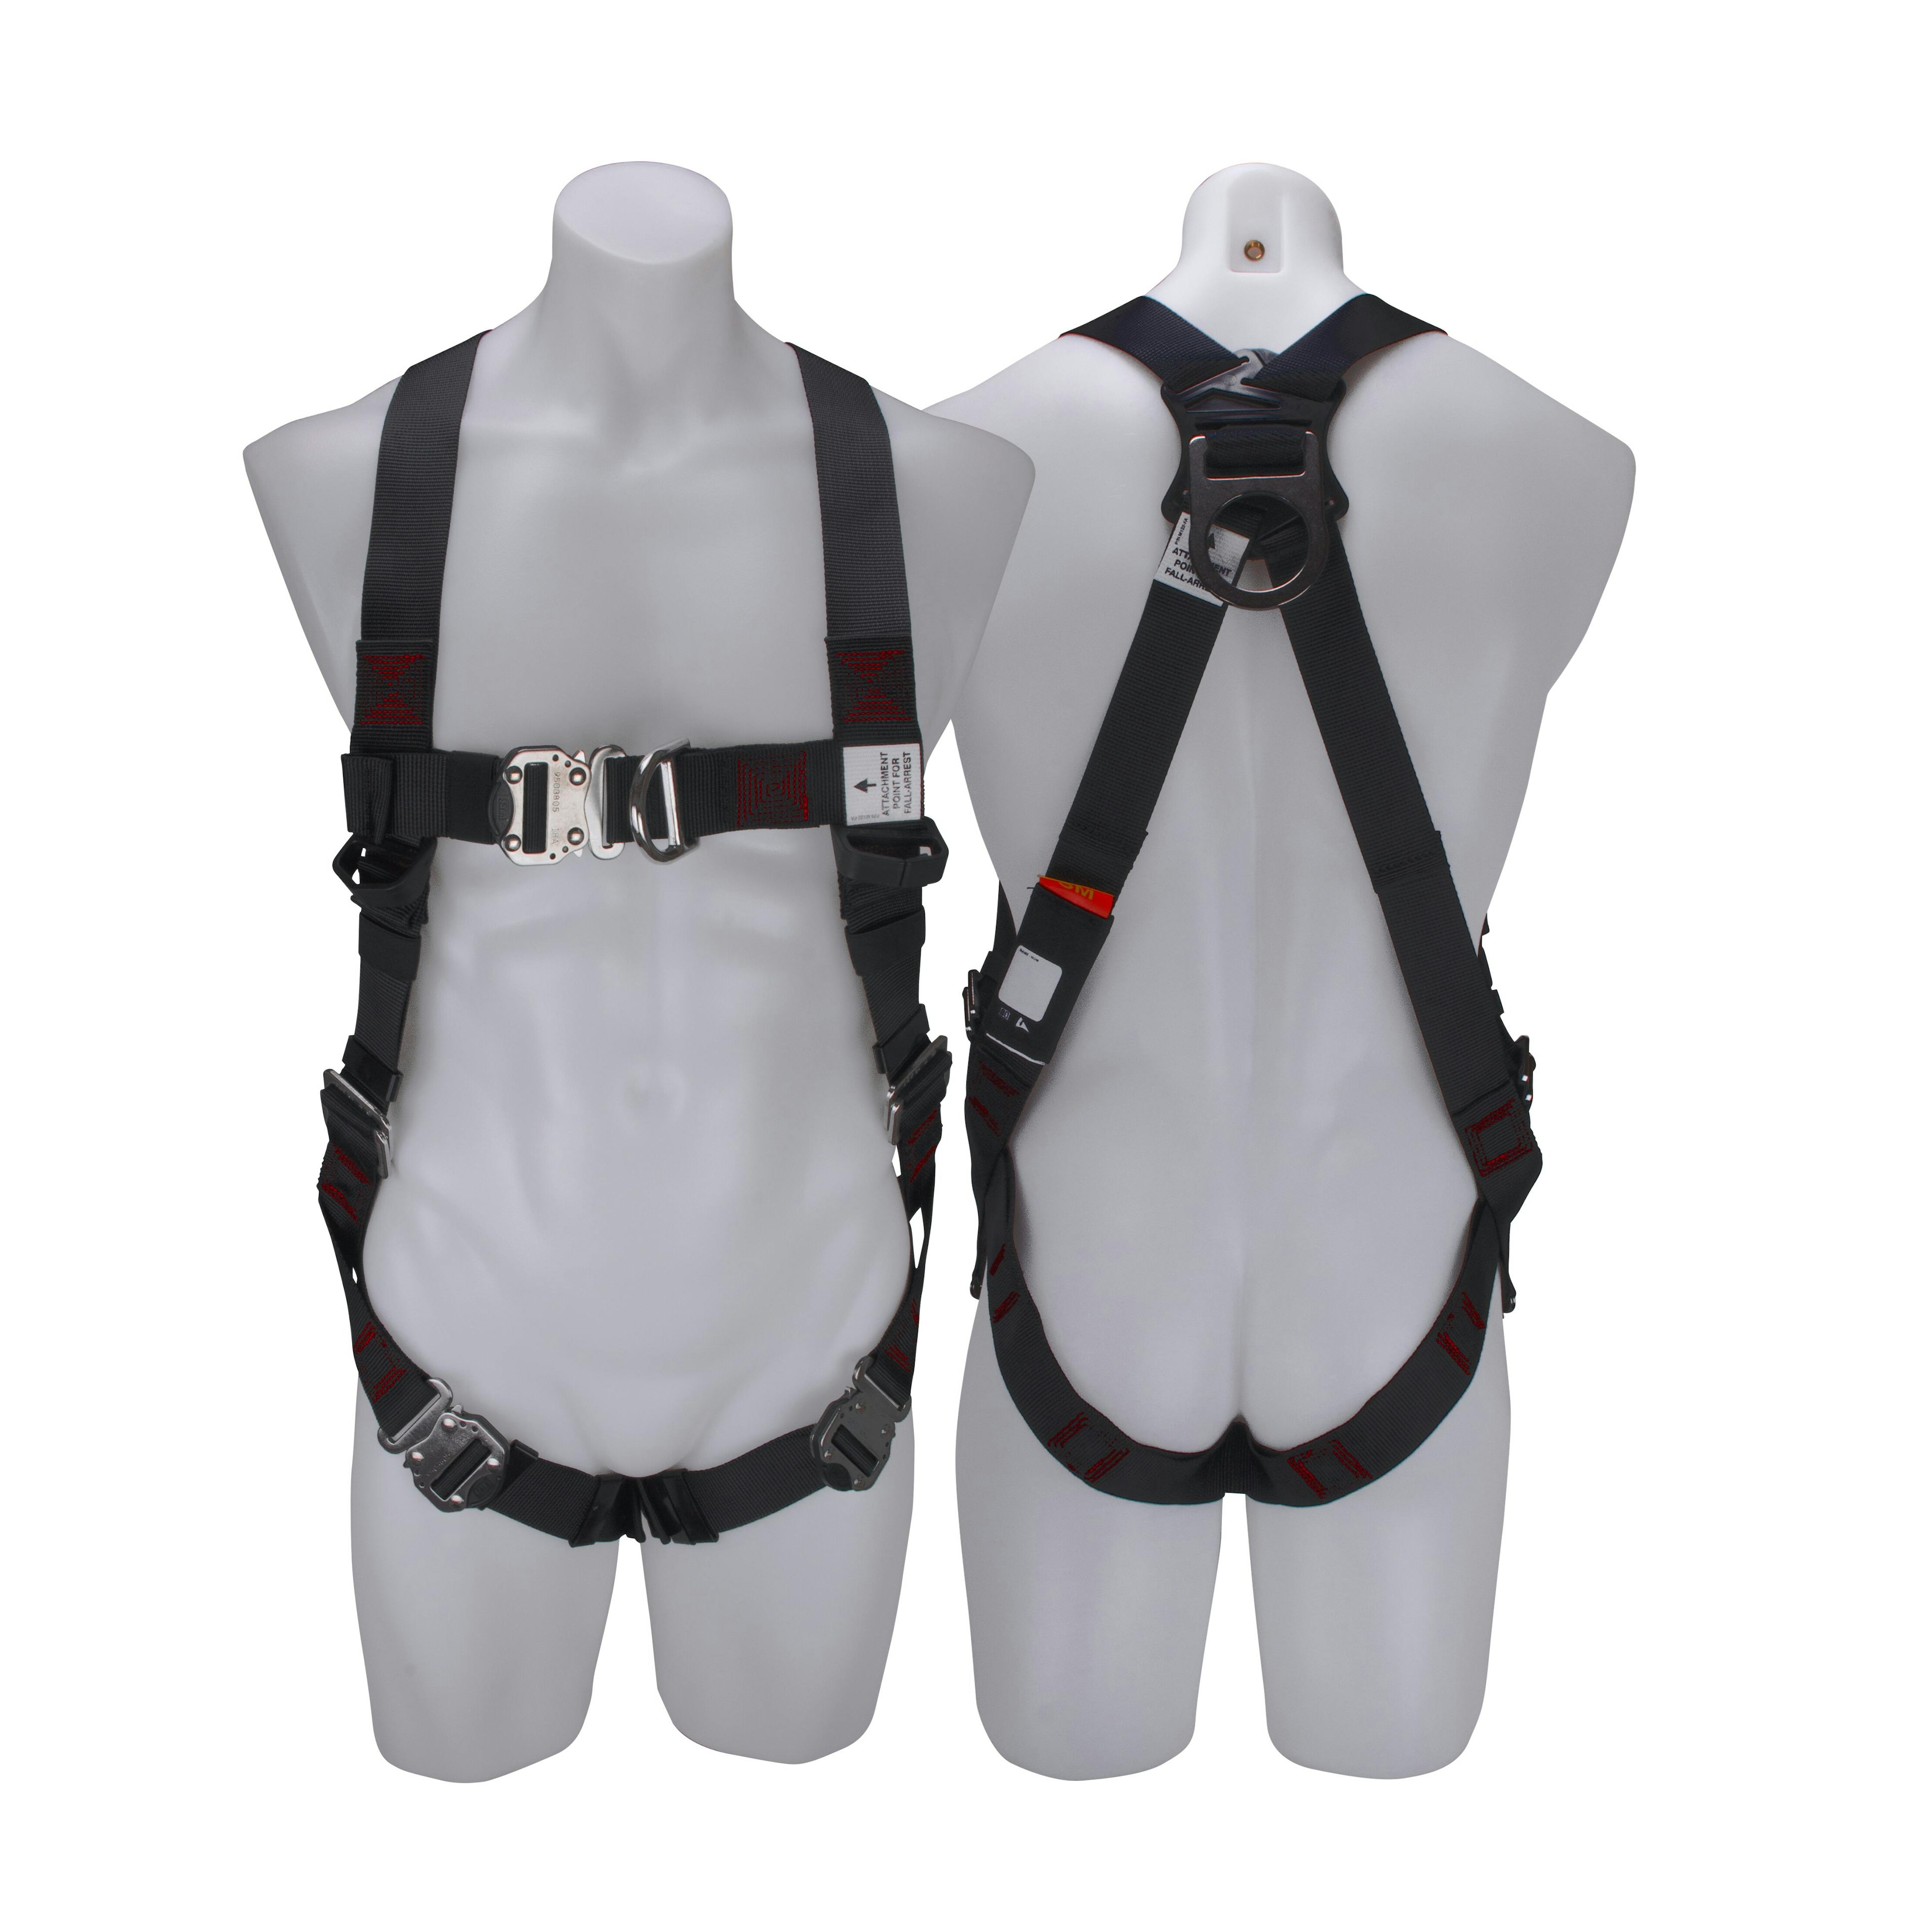 3M™ PROTECTA® X Riggers Harness with Stainless Steel 1161665, Red and Black, Medium, 1 EA/Case